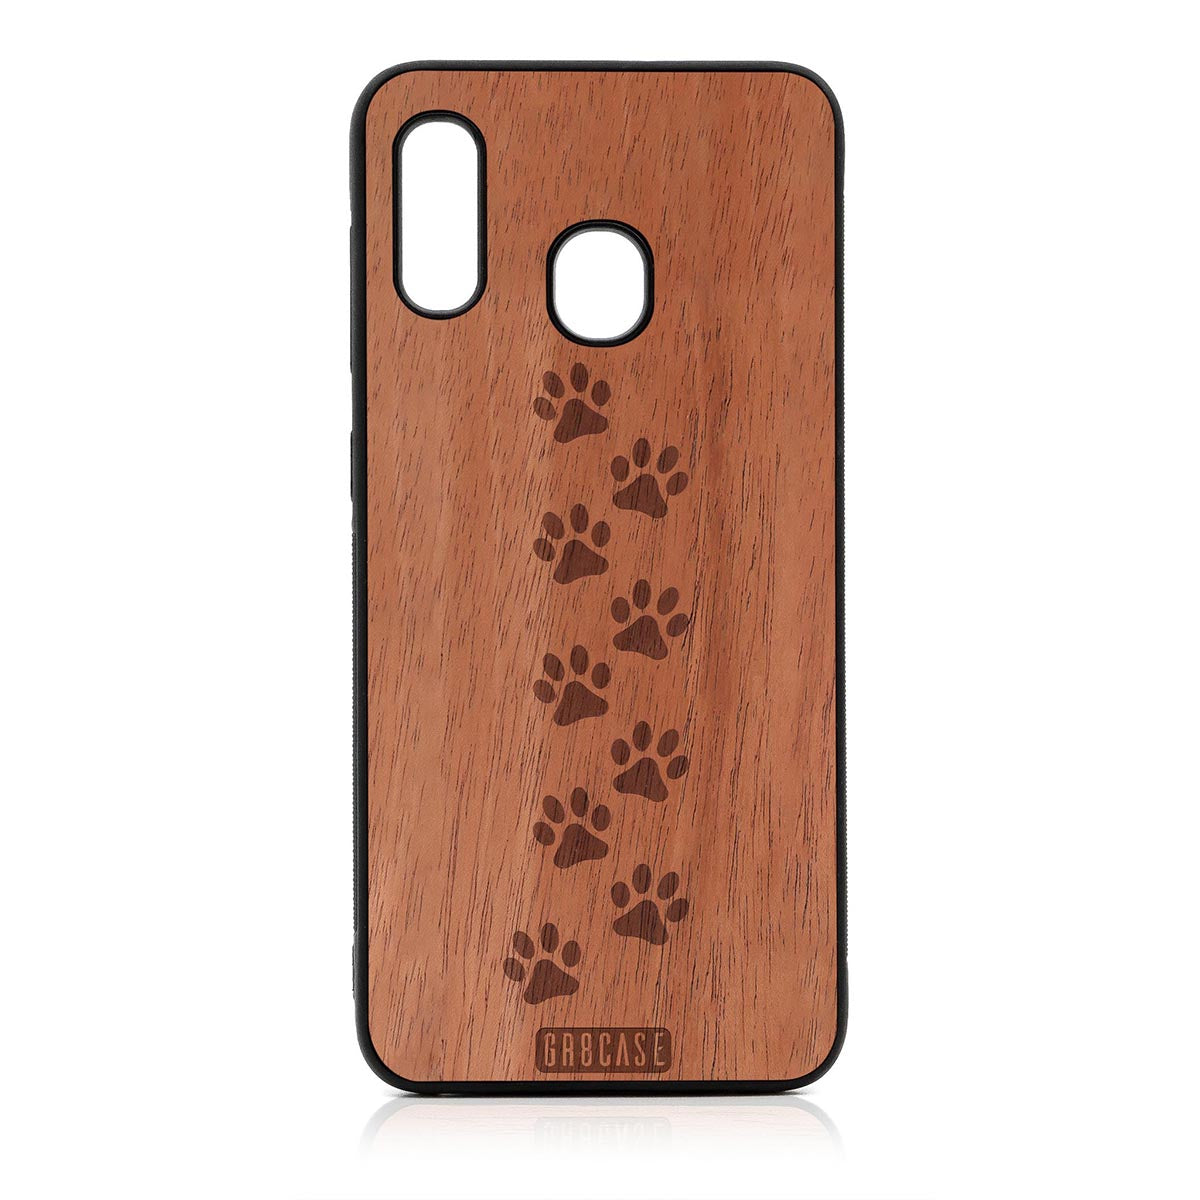 Paw Prints Design Wood Case For Samsung Galaxy A20 by GR8CASE